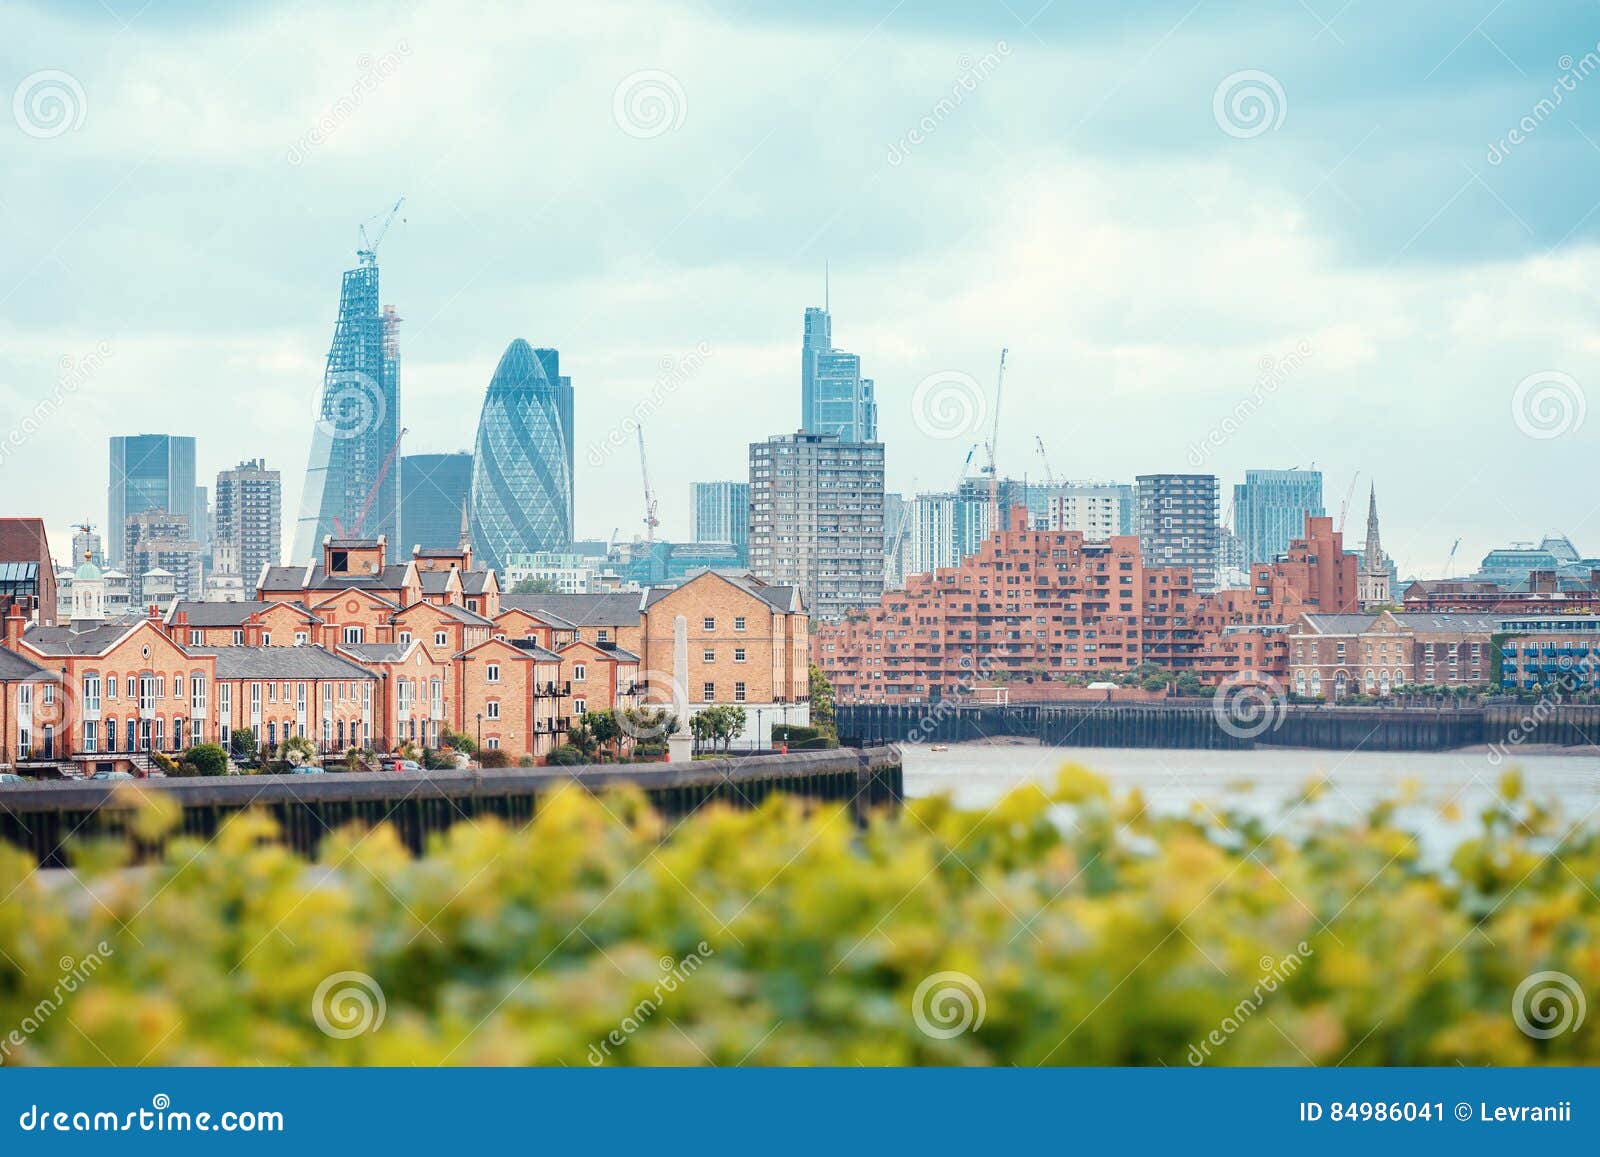 view of london docklands with the thames river, downtown, cucumber and city center